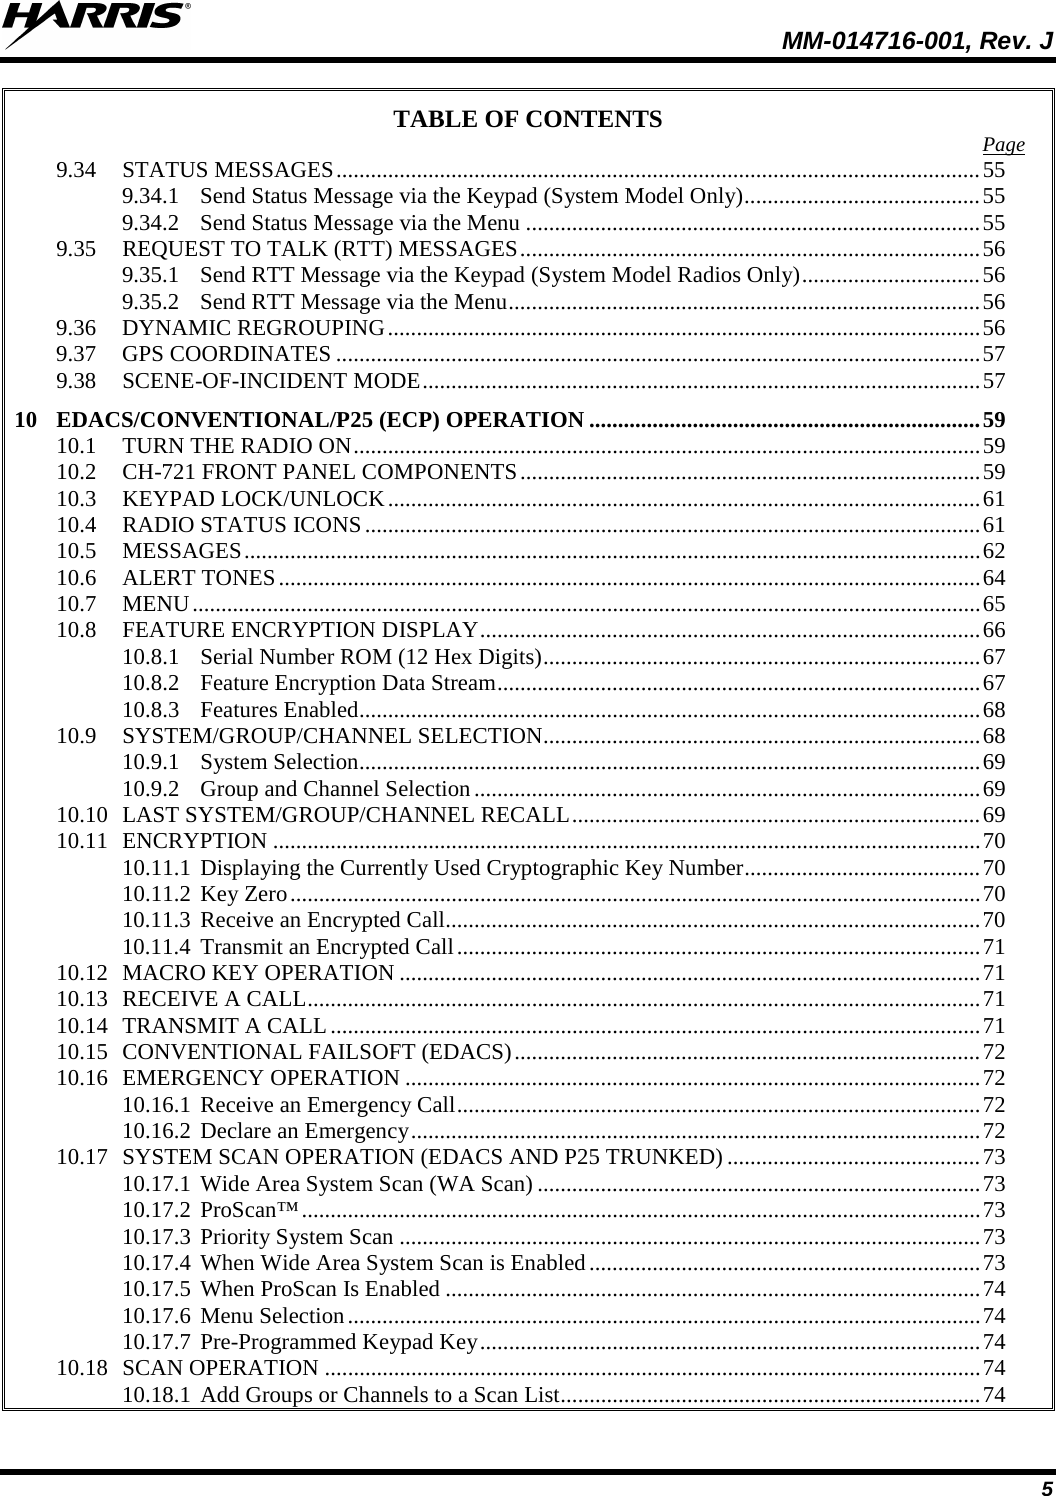  MM-014716-001, Rev. J 5 TABLE OF CONTENTS Page 9.34 STATUS MESSAGES ................................................................................................................ 55 9.34.1 Send Status Message via the Keypad (System Model Only) ......................................... 55 9.34.2 Send Status Message via the Menu ............................................................................... 55 9.35 REQUEST TO TALK (RTT) MESSAGES ................................................................................ 56 9.35.1 Send RTT Message via the Keypad (System Model Radios Only) ............................... 56 9.35.2 Send RTT Message via the Menu .................................................................................. 56 9.36 DYNAMIC REGROUPING ....................................................................................................... 56 9.37 GPS COORDINATES ................................................................................................................ 57 9.38 SCENE-OF-INCIDENT MODE ................................................................................................. 57 10 EDACS/CONVENTIONAL/P25 (ECP) OPERATION .................................................................... 59 10.1 TURN THE RADIO ON ............................................................................................................. 59 10.2 CH-721 FRONT PANEL COMPONENTS ................................................................................ 59 10.3 KEYPAD LOCK/UNLOCK ....................................................................................................... 61 10.4 RADIO STATUS ICONS ........................................................................................................... 61 10.5 MESSAGES ................................................................................................................................ 62 10.6 ALERT TONES .......................................................................................................................... 64 10.7 MENU ......................................................................................................................................... 65 10.8 FEATURE ENCRYPTION DISPLAY ....................................................................................... 66 10.8.1 Serial Number ROM (12 Hex Digits) ............................................................................ 67 10.8.2 Feature Encryption Data Stream .................................................................................... 67 10.8.3 Features Enabled ............................................................................................................ 68 10.9 SYSTEM/GROUP/CHANNEL SELECTION............................................................................ 68 10.9.1 System Selection ............................................................................................................ 69 10.9.2 Group and Channel Selection ........................................................................................ 69 10.10 LAST SYSTEM/GROUP/CHANNEL RECALL ....................................................................... 69 10.11 ENCRYPTION ........................................................................................................................... 70 10.11.1 Displaying the Currently Used Cryptographic Key Number ......................................... 70 10.11.2 Key Zero ........................................................................................................................ 70 10.11.3 Receive an Encrypted Call............................................................................................. 70 10.11.4 Transmit an Encrypted Call ........................................................................................... 71 10.12 MACRO KEY OPERATION ..................................................................................................... 71 10.13 RECEIVE A CALL ..................................................................................................................... 71 10.14 TRANSMIT A CALL ................................................................................................................. 71 10.15 CONVENTIONAL FAILSOFT (EDACS) ................................................................................. 72 10.16 EMERGENCY OPERATION .................................................................................................... 72 10.16.1 Receive an Emergency Call ........................................................................................... 72 10.16.2 Declare an Emergency ................................................................................................... 72 10.17 SYSTEM SCAN OPERATION (EDACS AND P25 TRUNKED) ............................................ 73 10.17.1 Wide Area System Scan (WA Scan) ............................................................................. 73 10.17.2 ProScan™ ...................................................................................................................... 73 10.17.3 Priority System Scan ..................................................................................................... 73 10.17.4 When Wide Area System Scan is Enabled .................................................................... 73 10.17.5 When ProScan Is Enabled ............................................................................................. 74 10.17.6 Menu Selection .............................................................................................................. 74 10.17.7 Pre-Programmed Keypad Key ....................................................................................... 74 10.18 SCAN OPERATION .................................................................................................................. 74 10.18.1 Add Groups or Channels to a Scan List ......................................................................... 74 